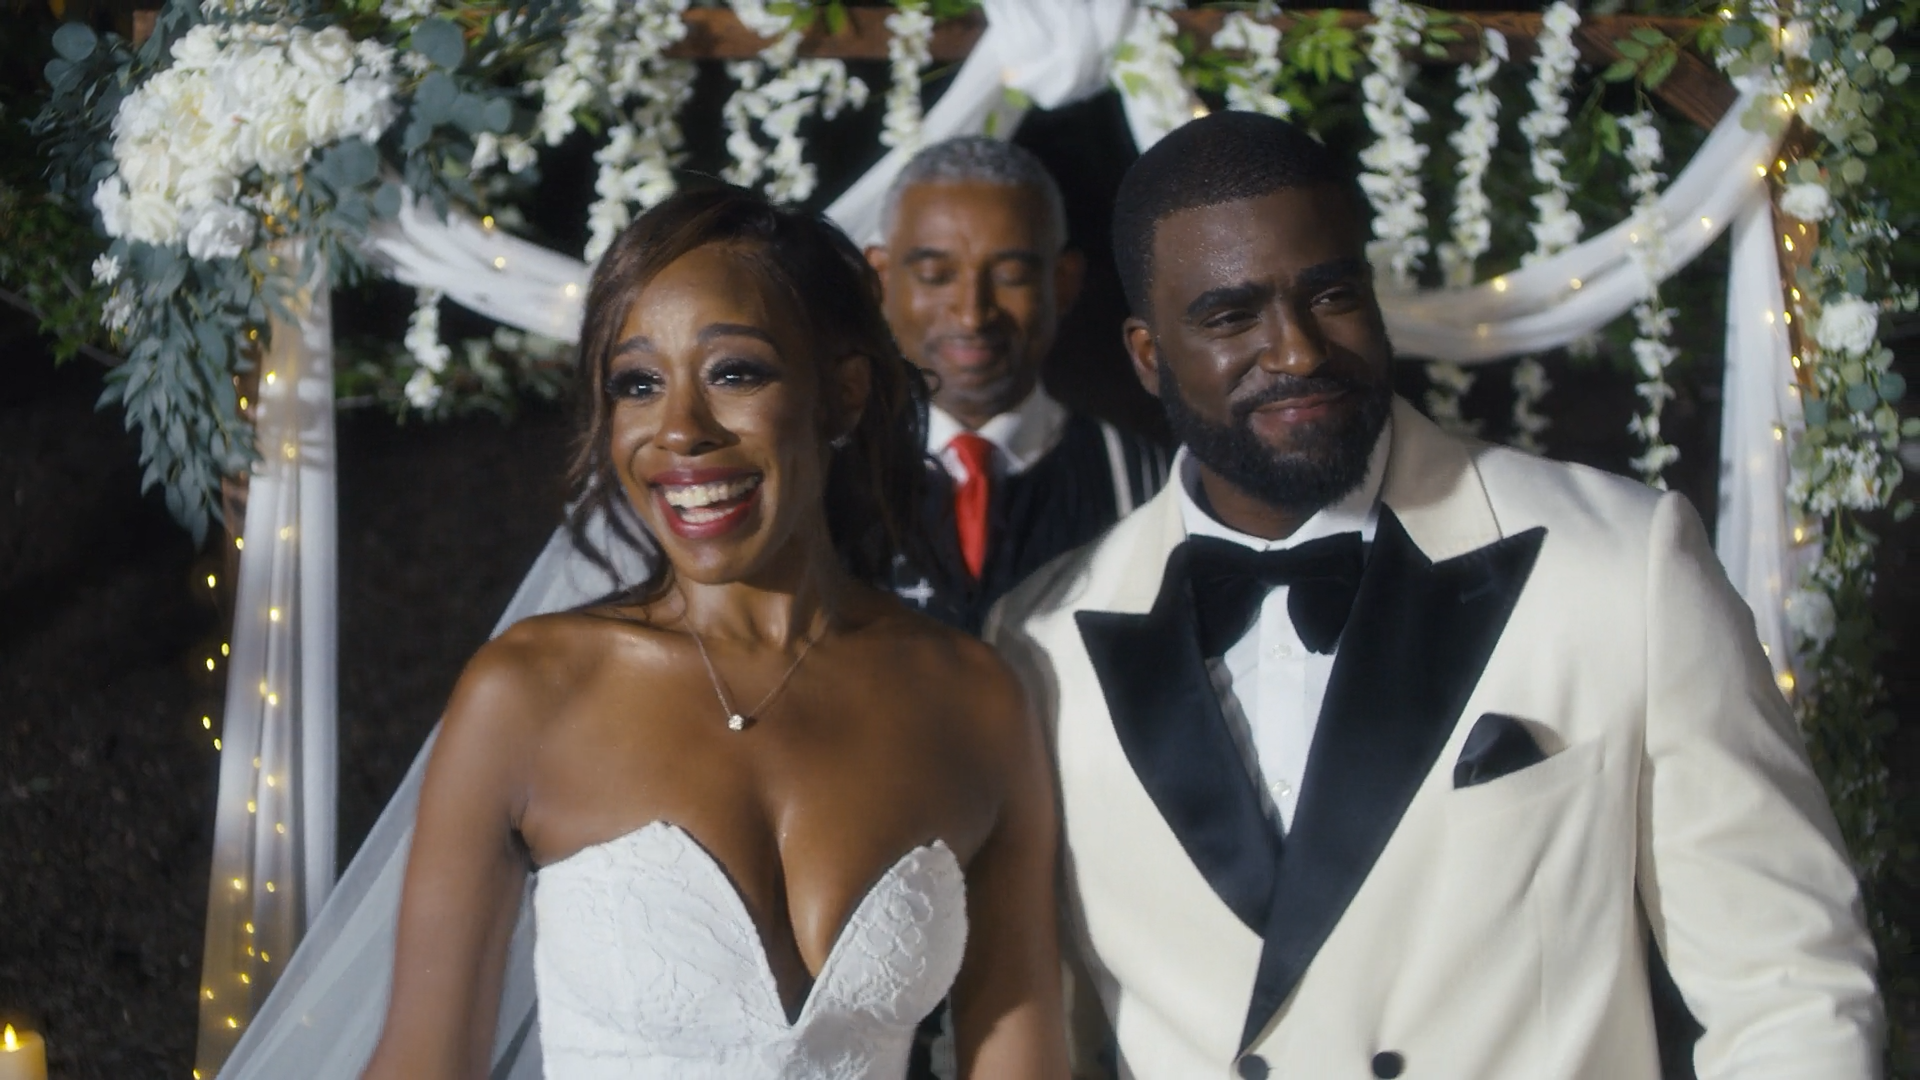 'My Valentine Wedding Trailer': Shaquita Smith And Travis Cure Are An Engaged Couple Threatened By Their Exes